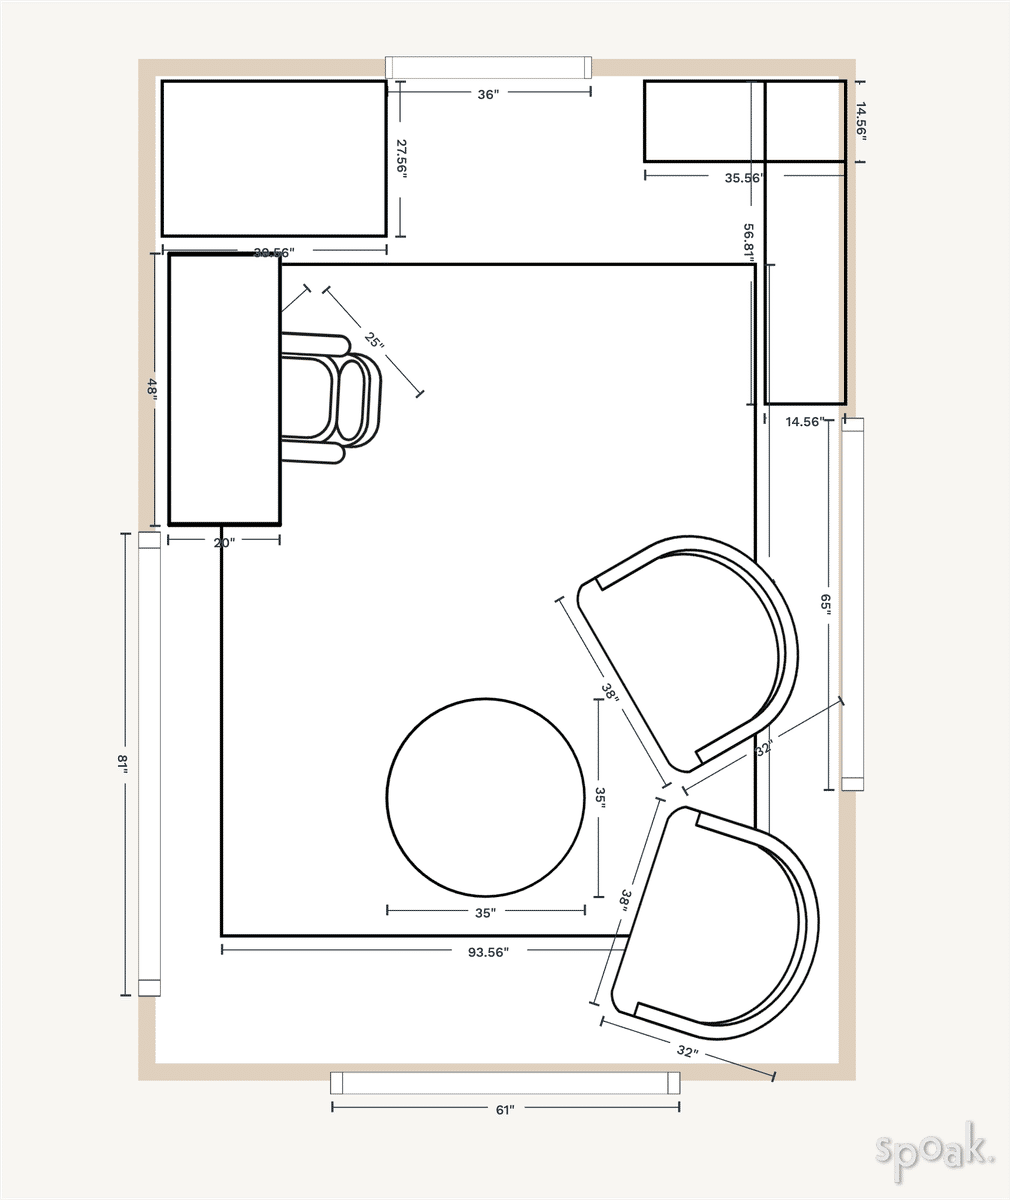 Study Layout designed by Morgan Dowling